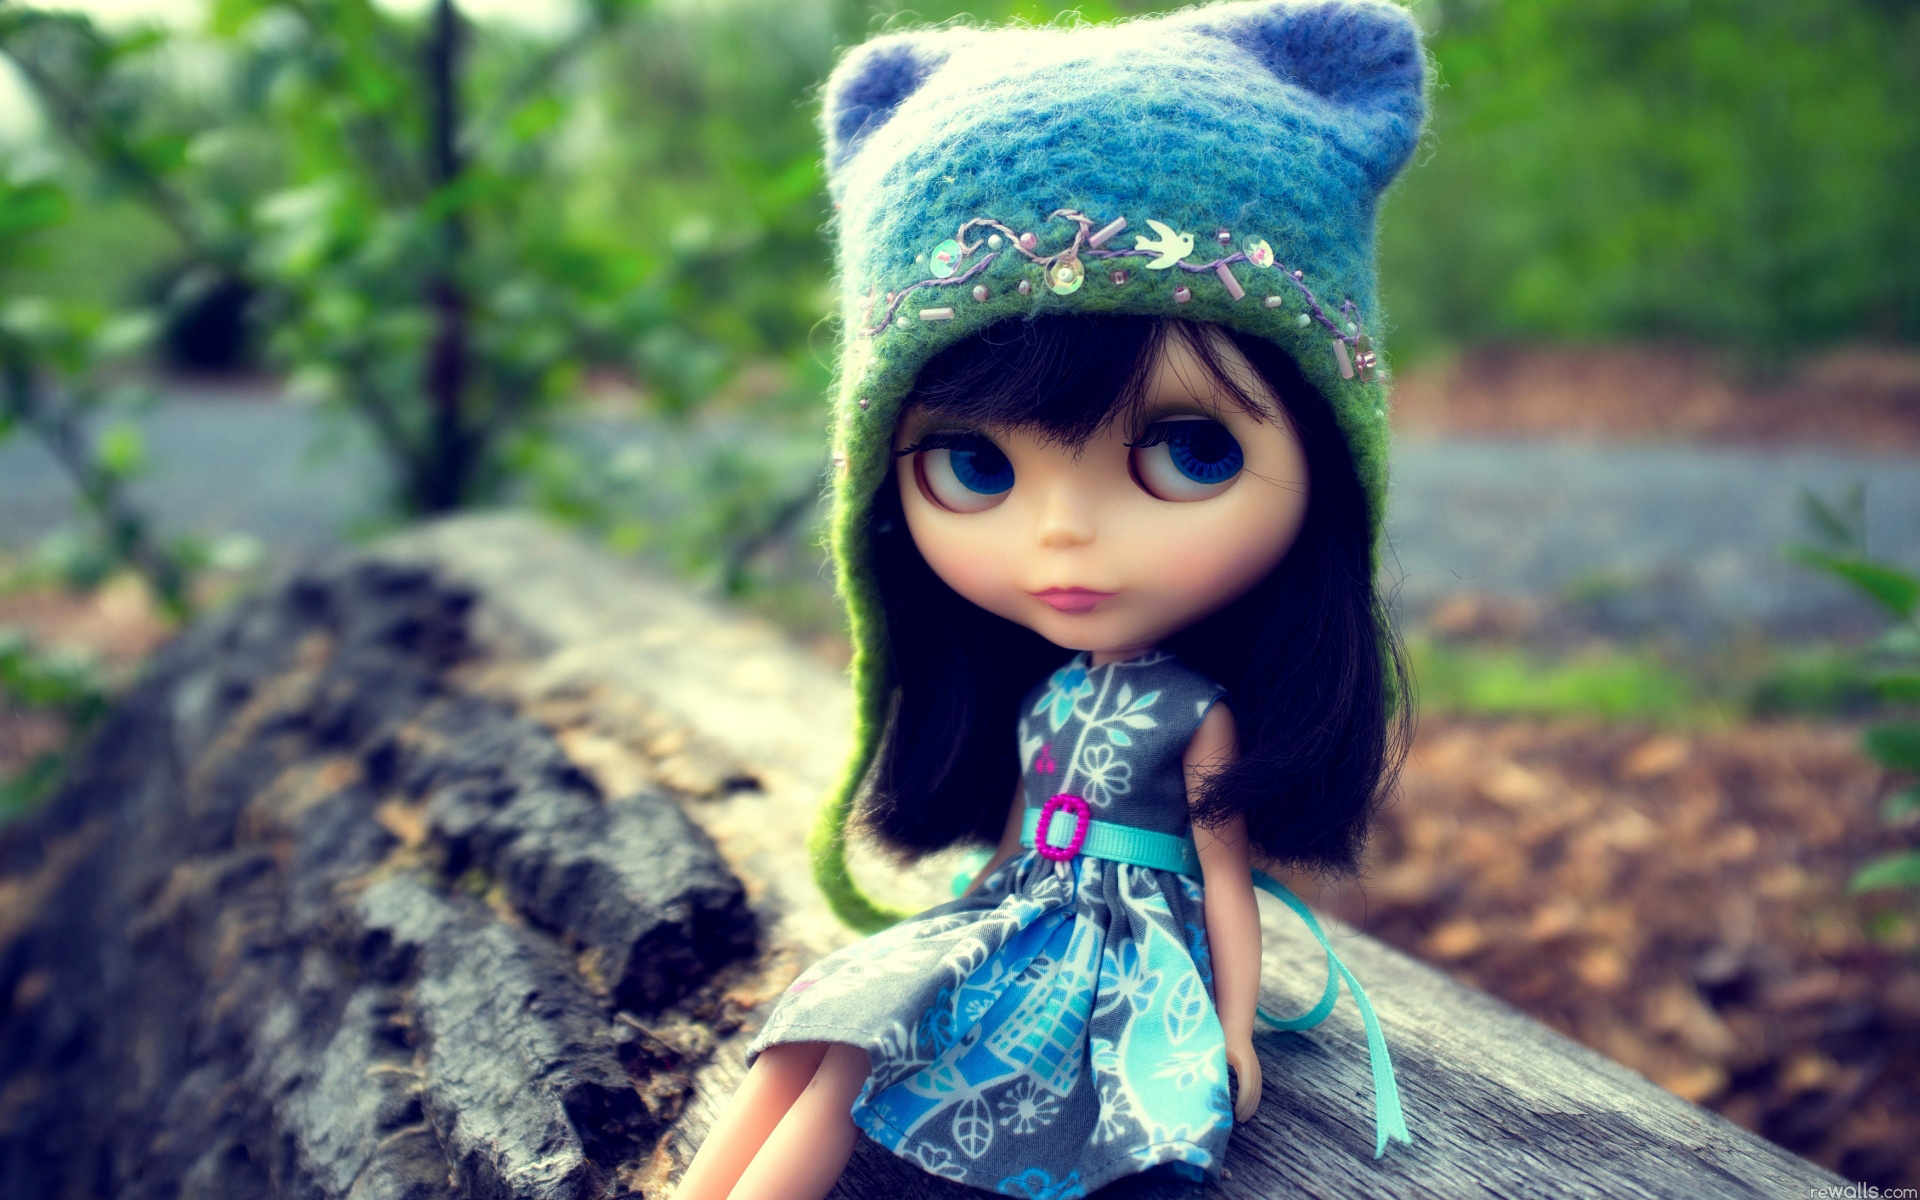 new cute doll hd wallpaper With Resolutions 19201200 Pixel 1920x1200